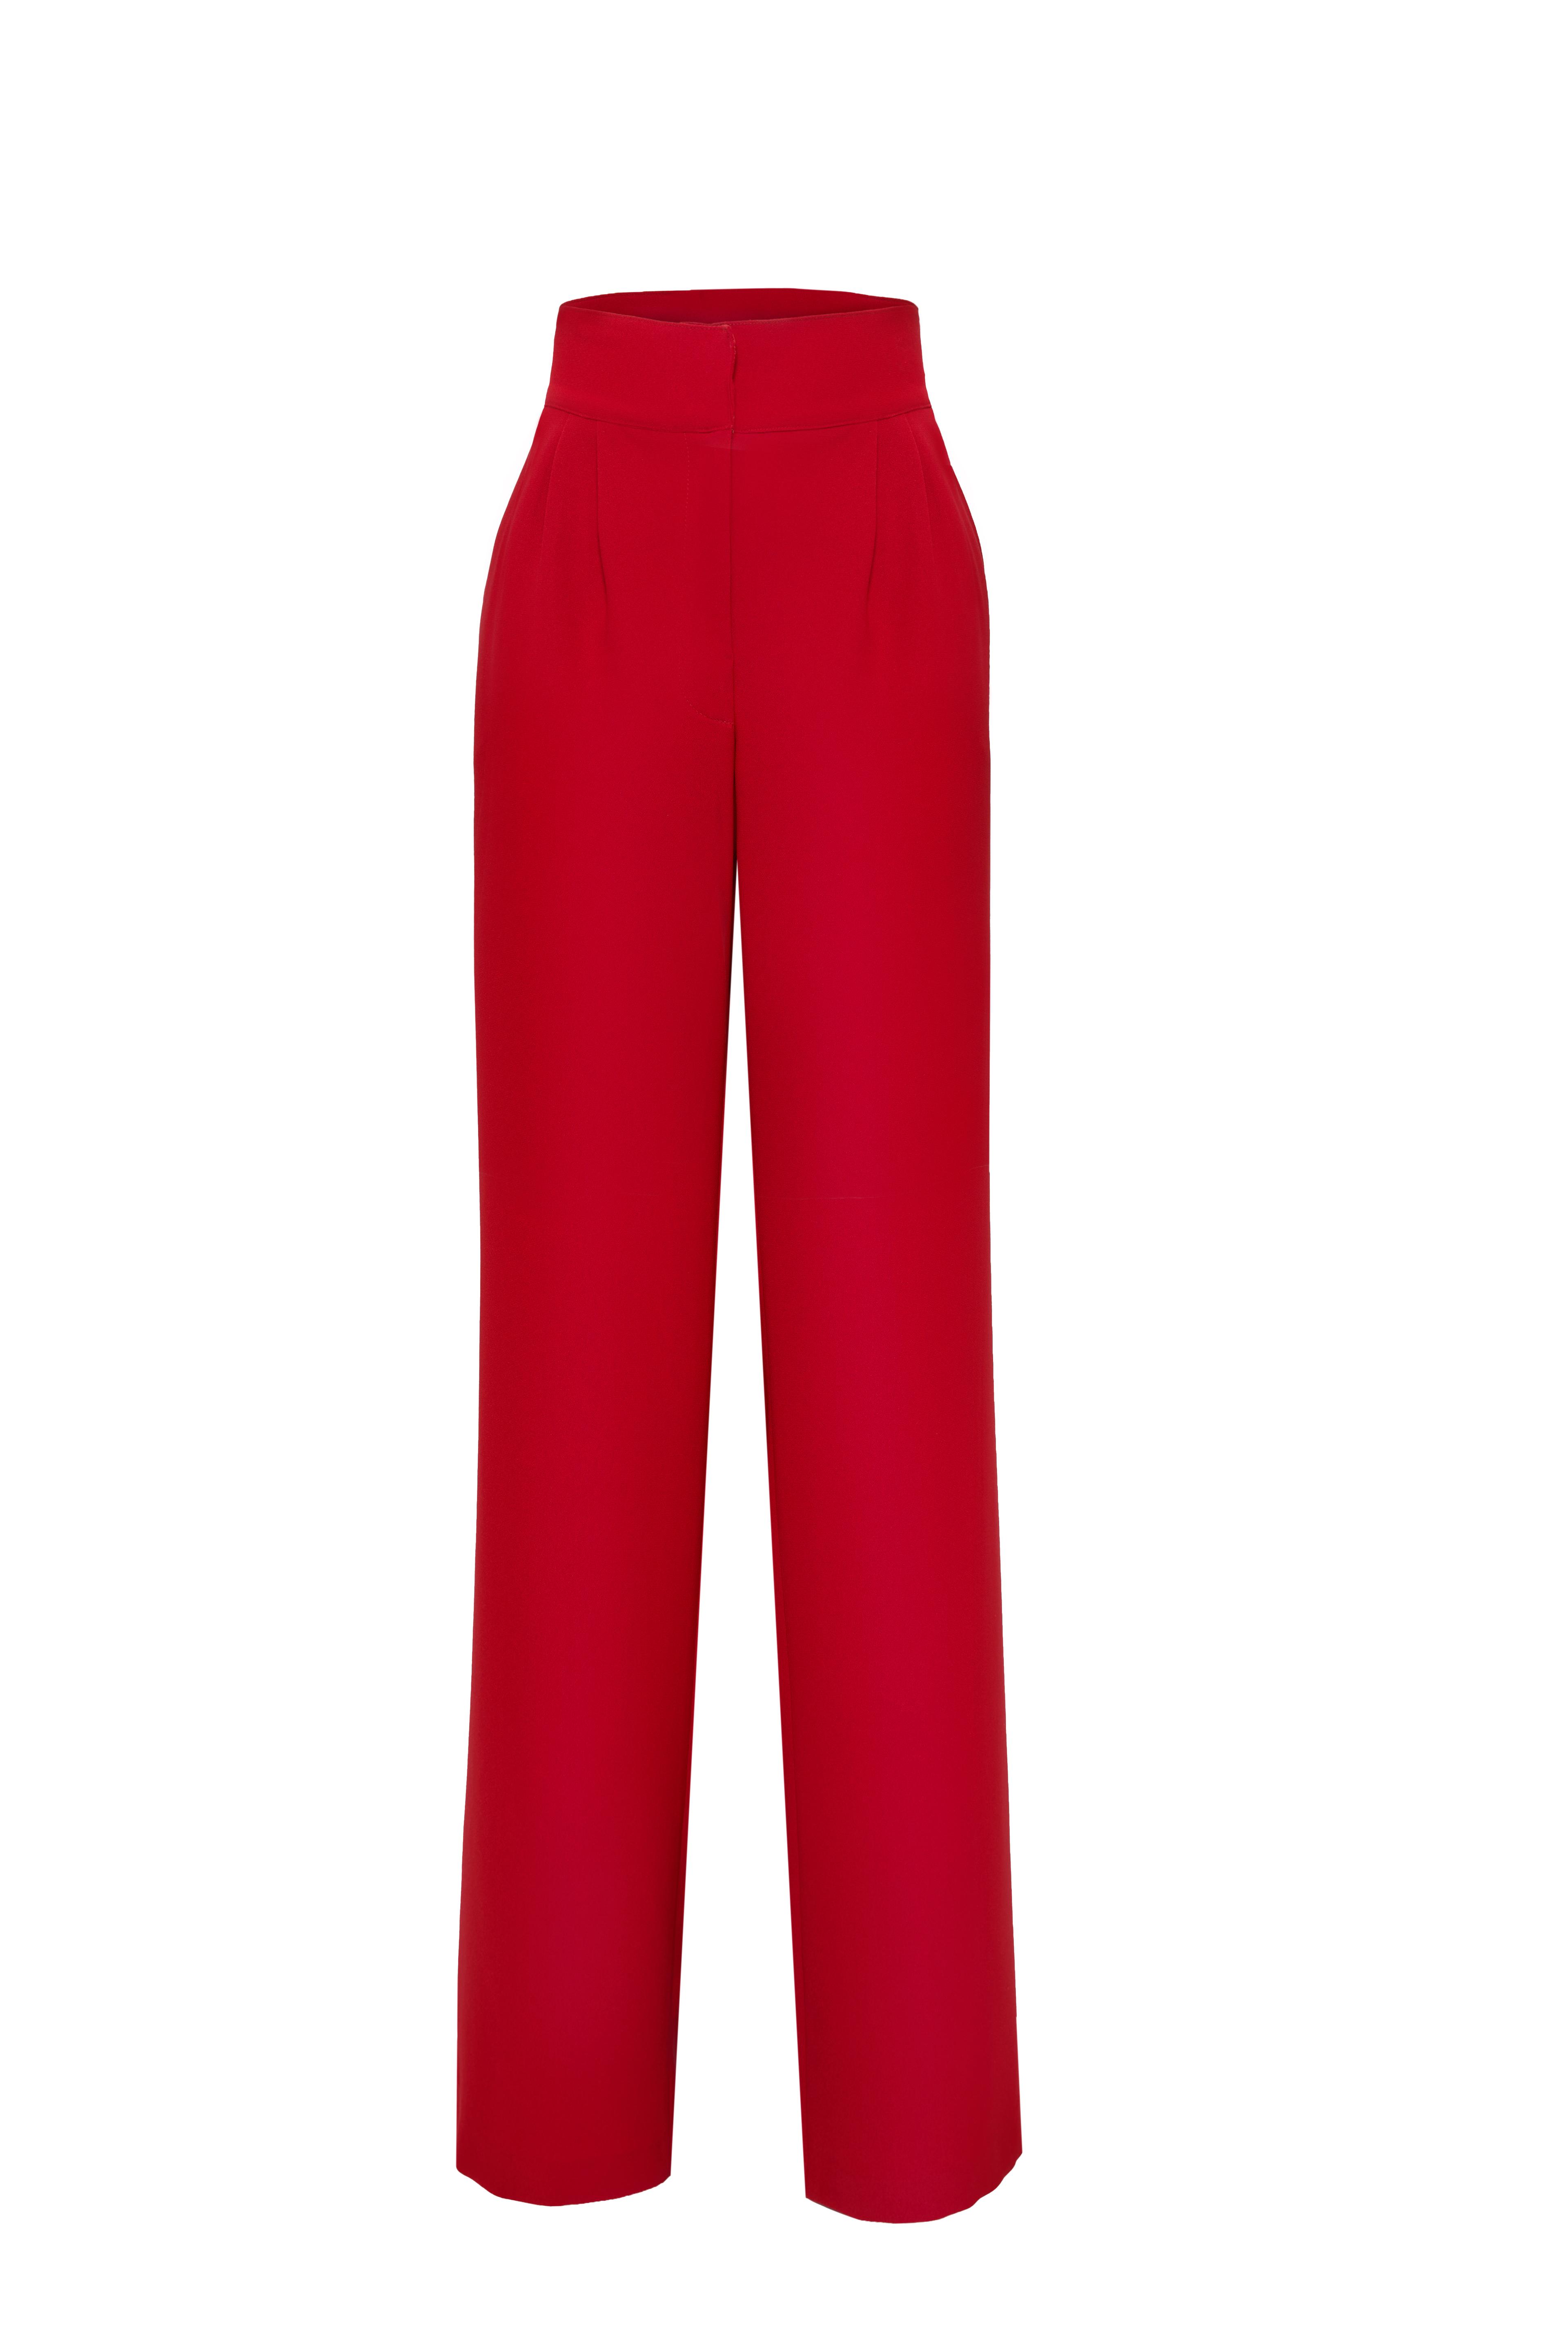 Vivien Limited Edition Trousers - Red